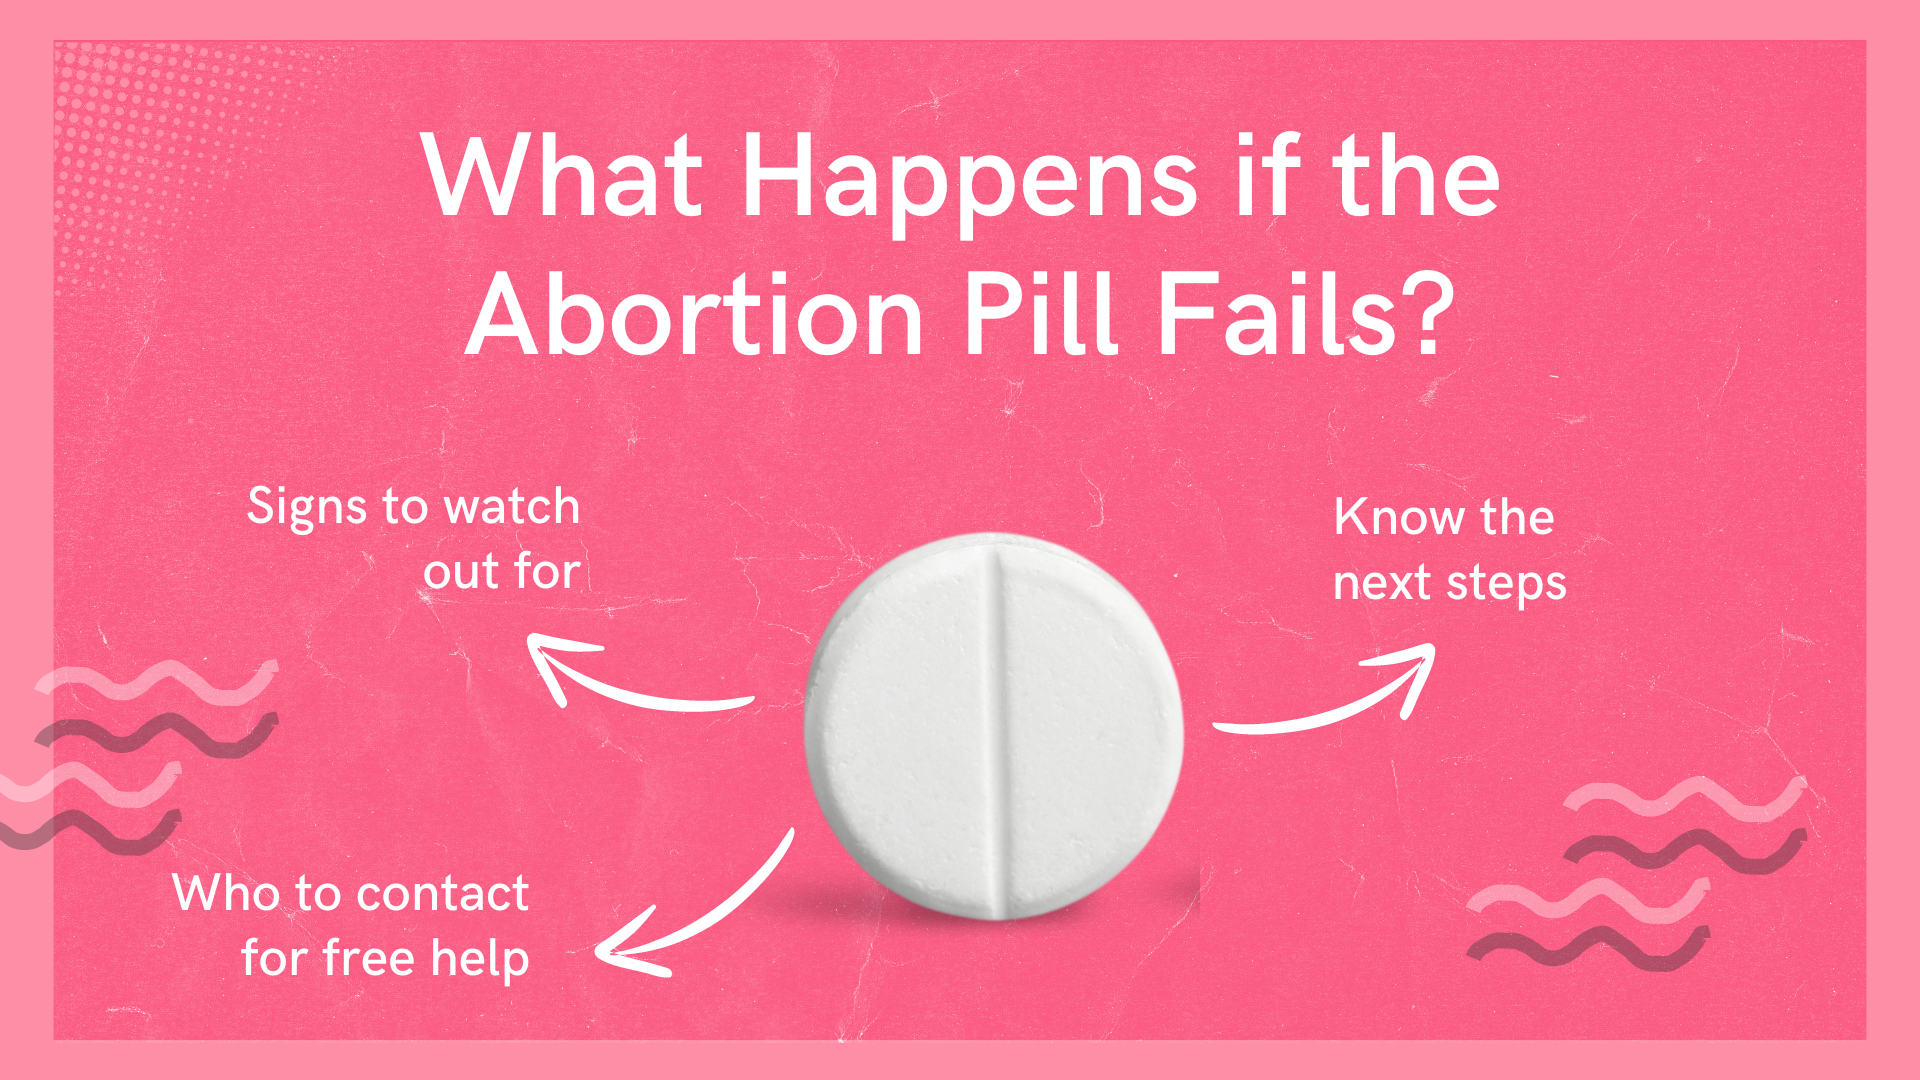 Worried about what happens if the abortion pill fails? Learn about your options and next steps to make an informed decision. Get free, compassionate support and information at Problem Pregnancy Center.